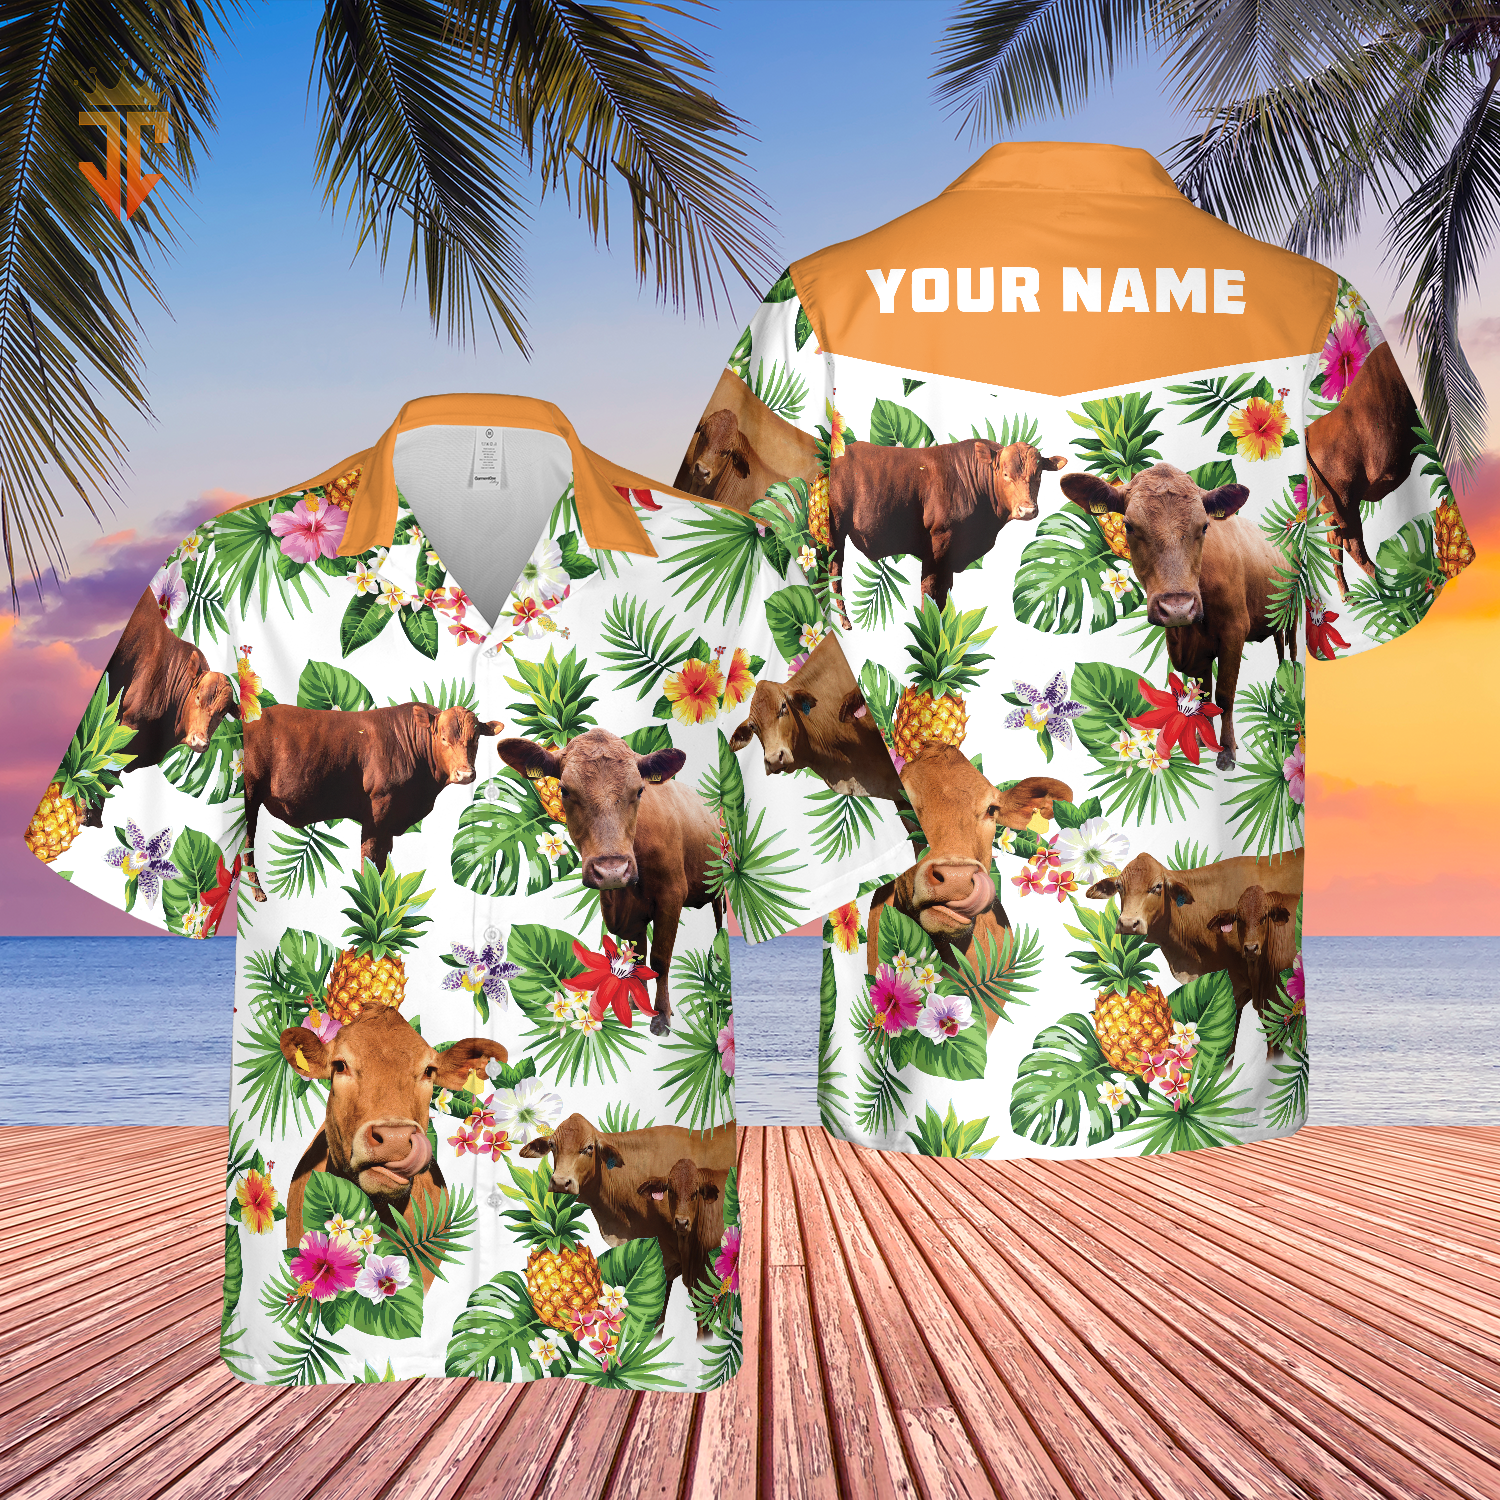 Personalized Name Red Angus Cattle Pineapples All Over Printed 3D Hawaiian Shirt